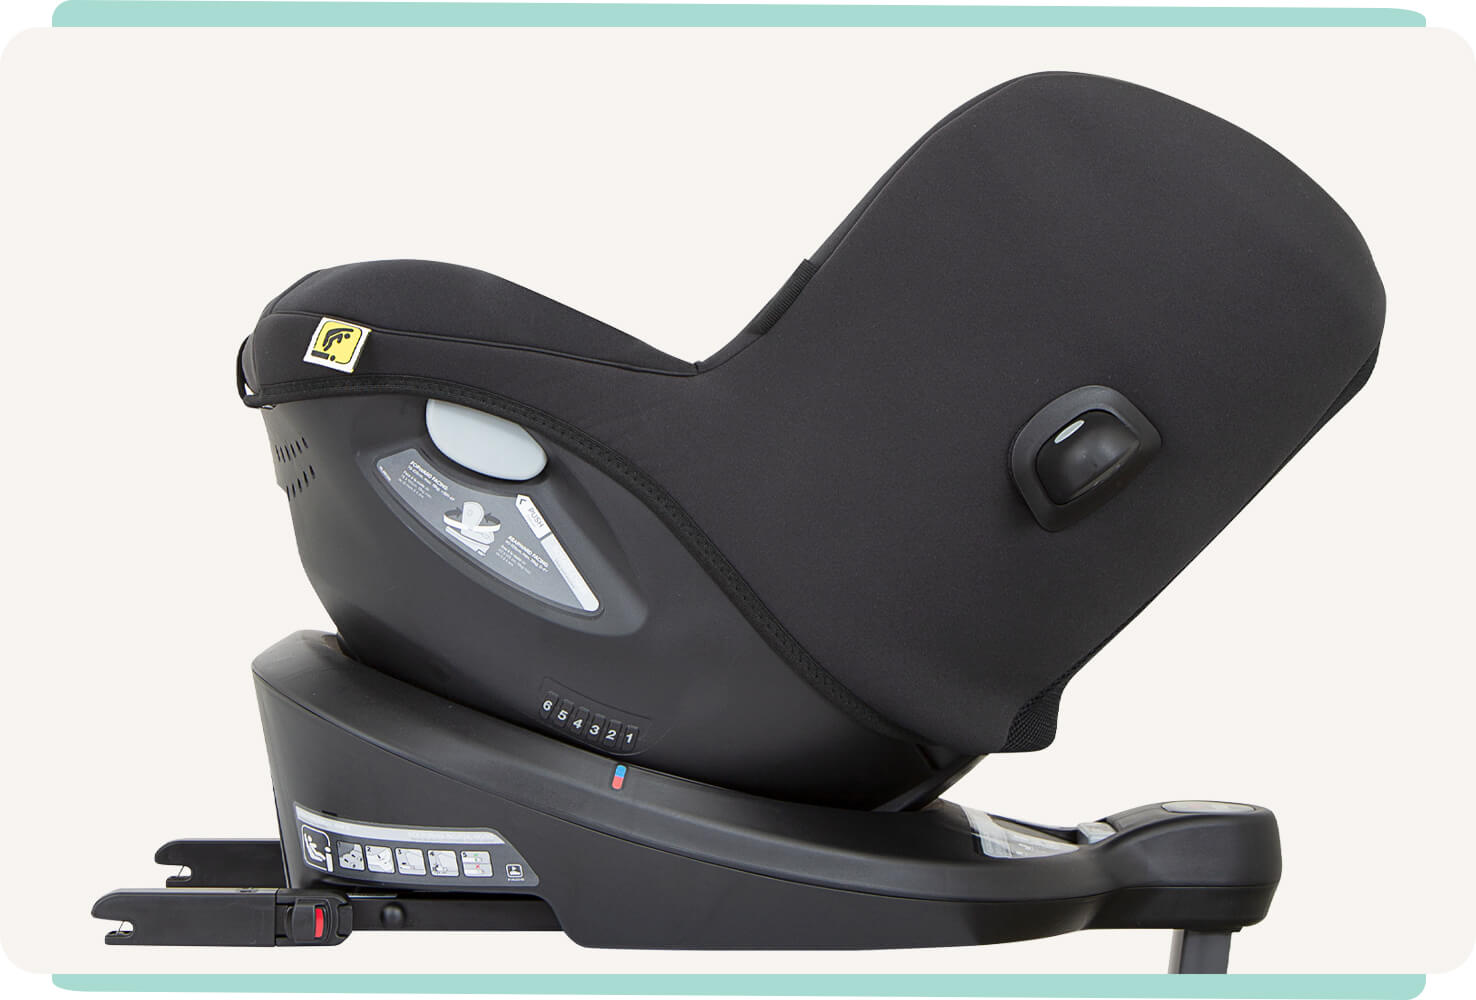 Joie I-Spin 360 R spinning car seat in black in profile facing to the left and fully reclined.